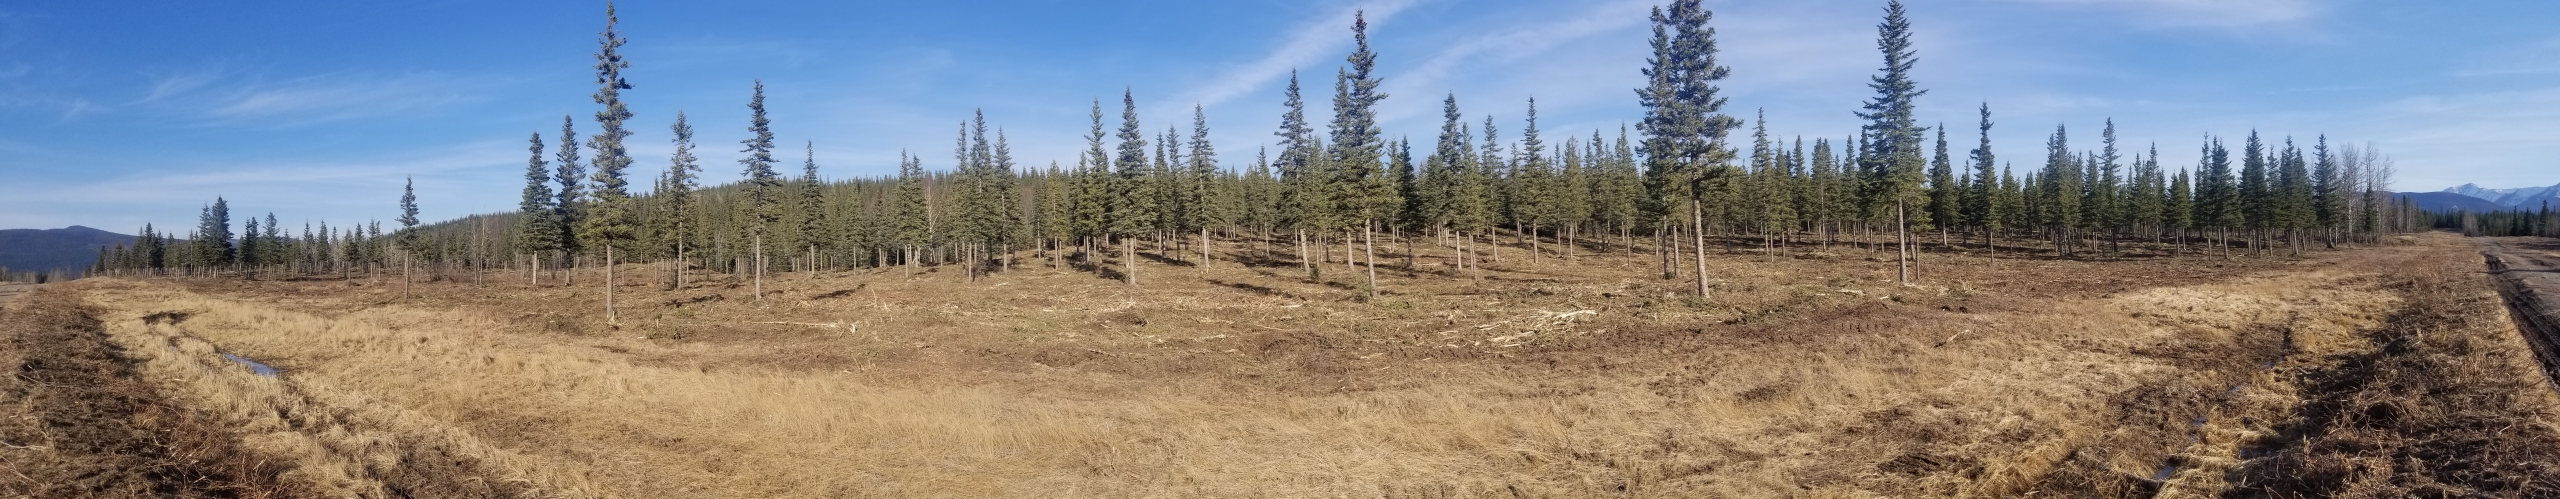 Finished product. Completed FireSmart fuel breaks that encircle the community of Hinton, Alberta. These projects were completed by Spectrum in the winter of 2019/2020.